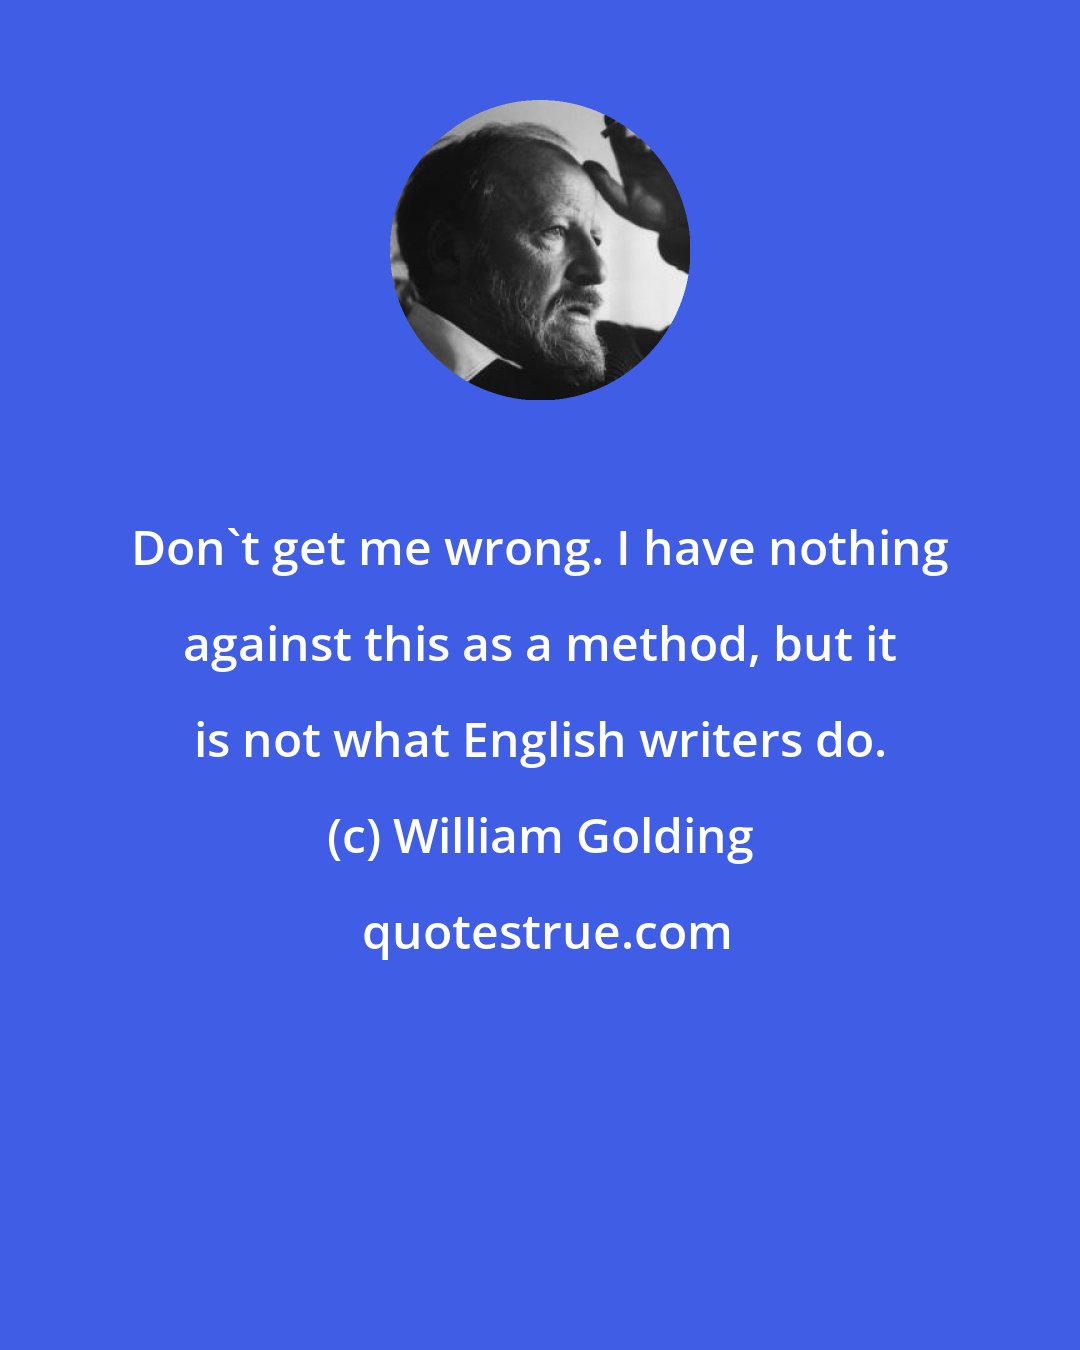 William Golding: Don't get me wrong. I have nothing against this as a method, but it is not what English writers do.